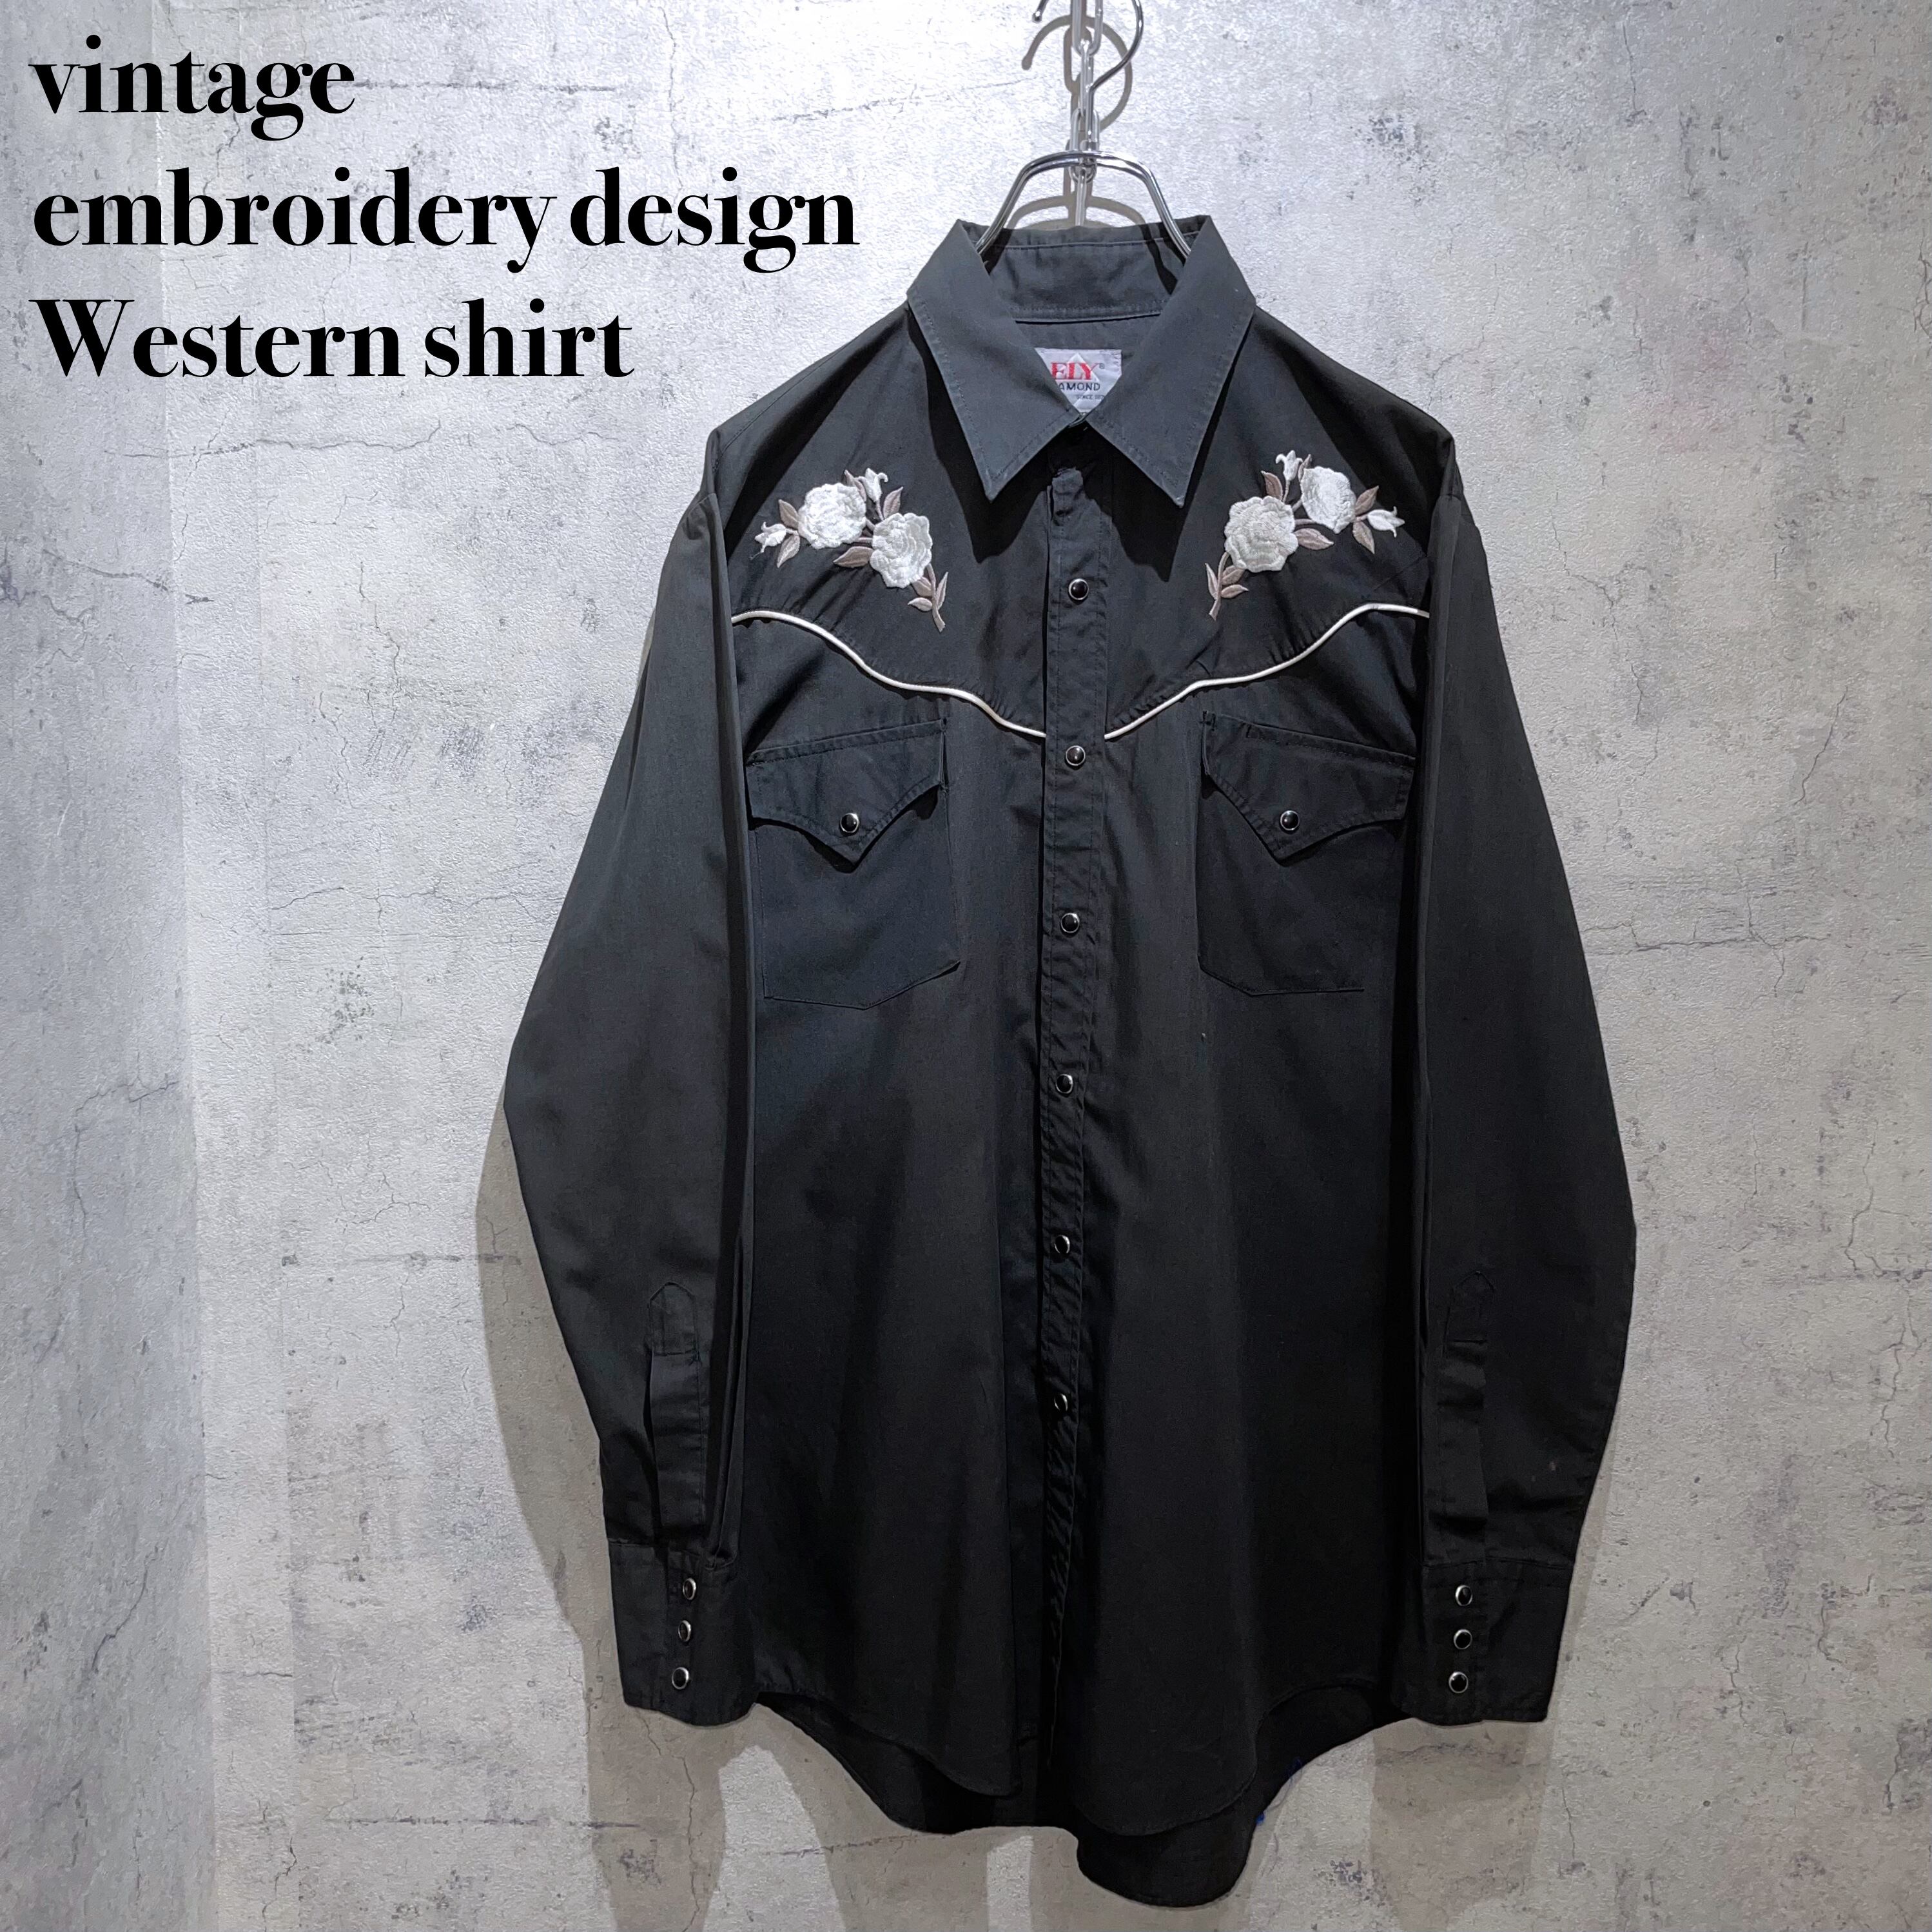 vintage embroidery design Western shirt | ayne powered by BASE